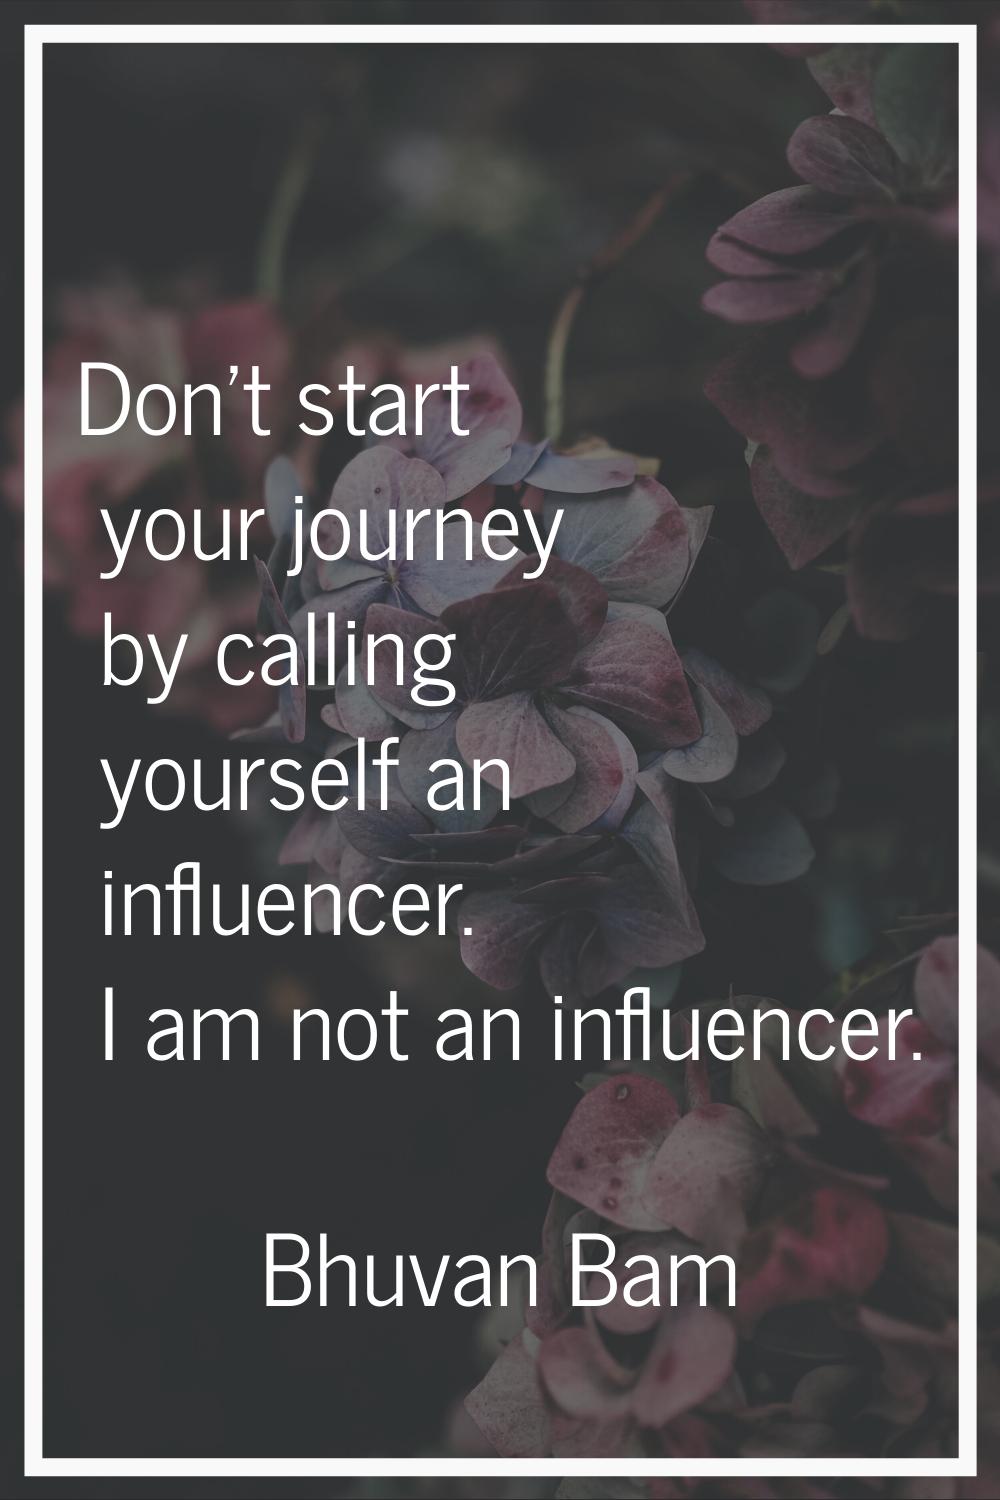 Don't start your journey by calling yourself an influencer. I am not an influencer.